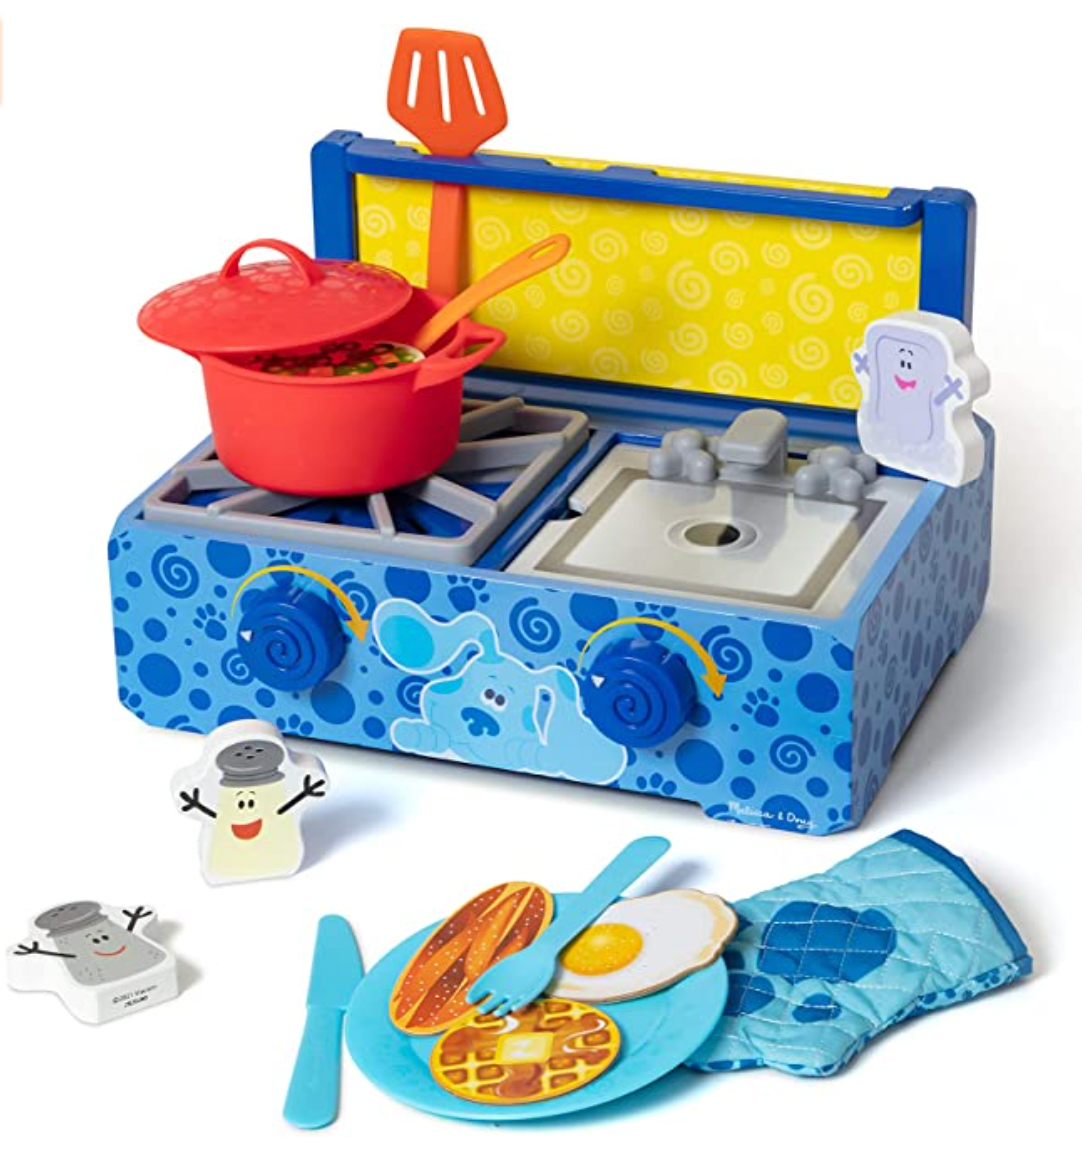 Melissa & Doug Blue's Clues & You! Wooden Cooking Play Set